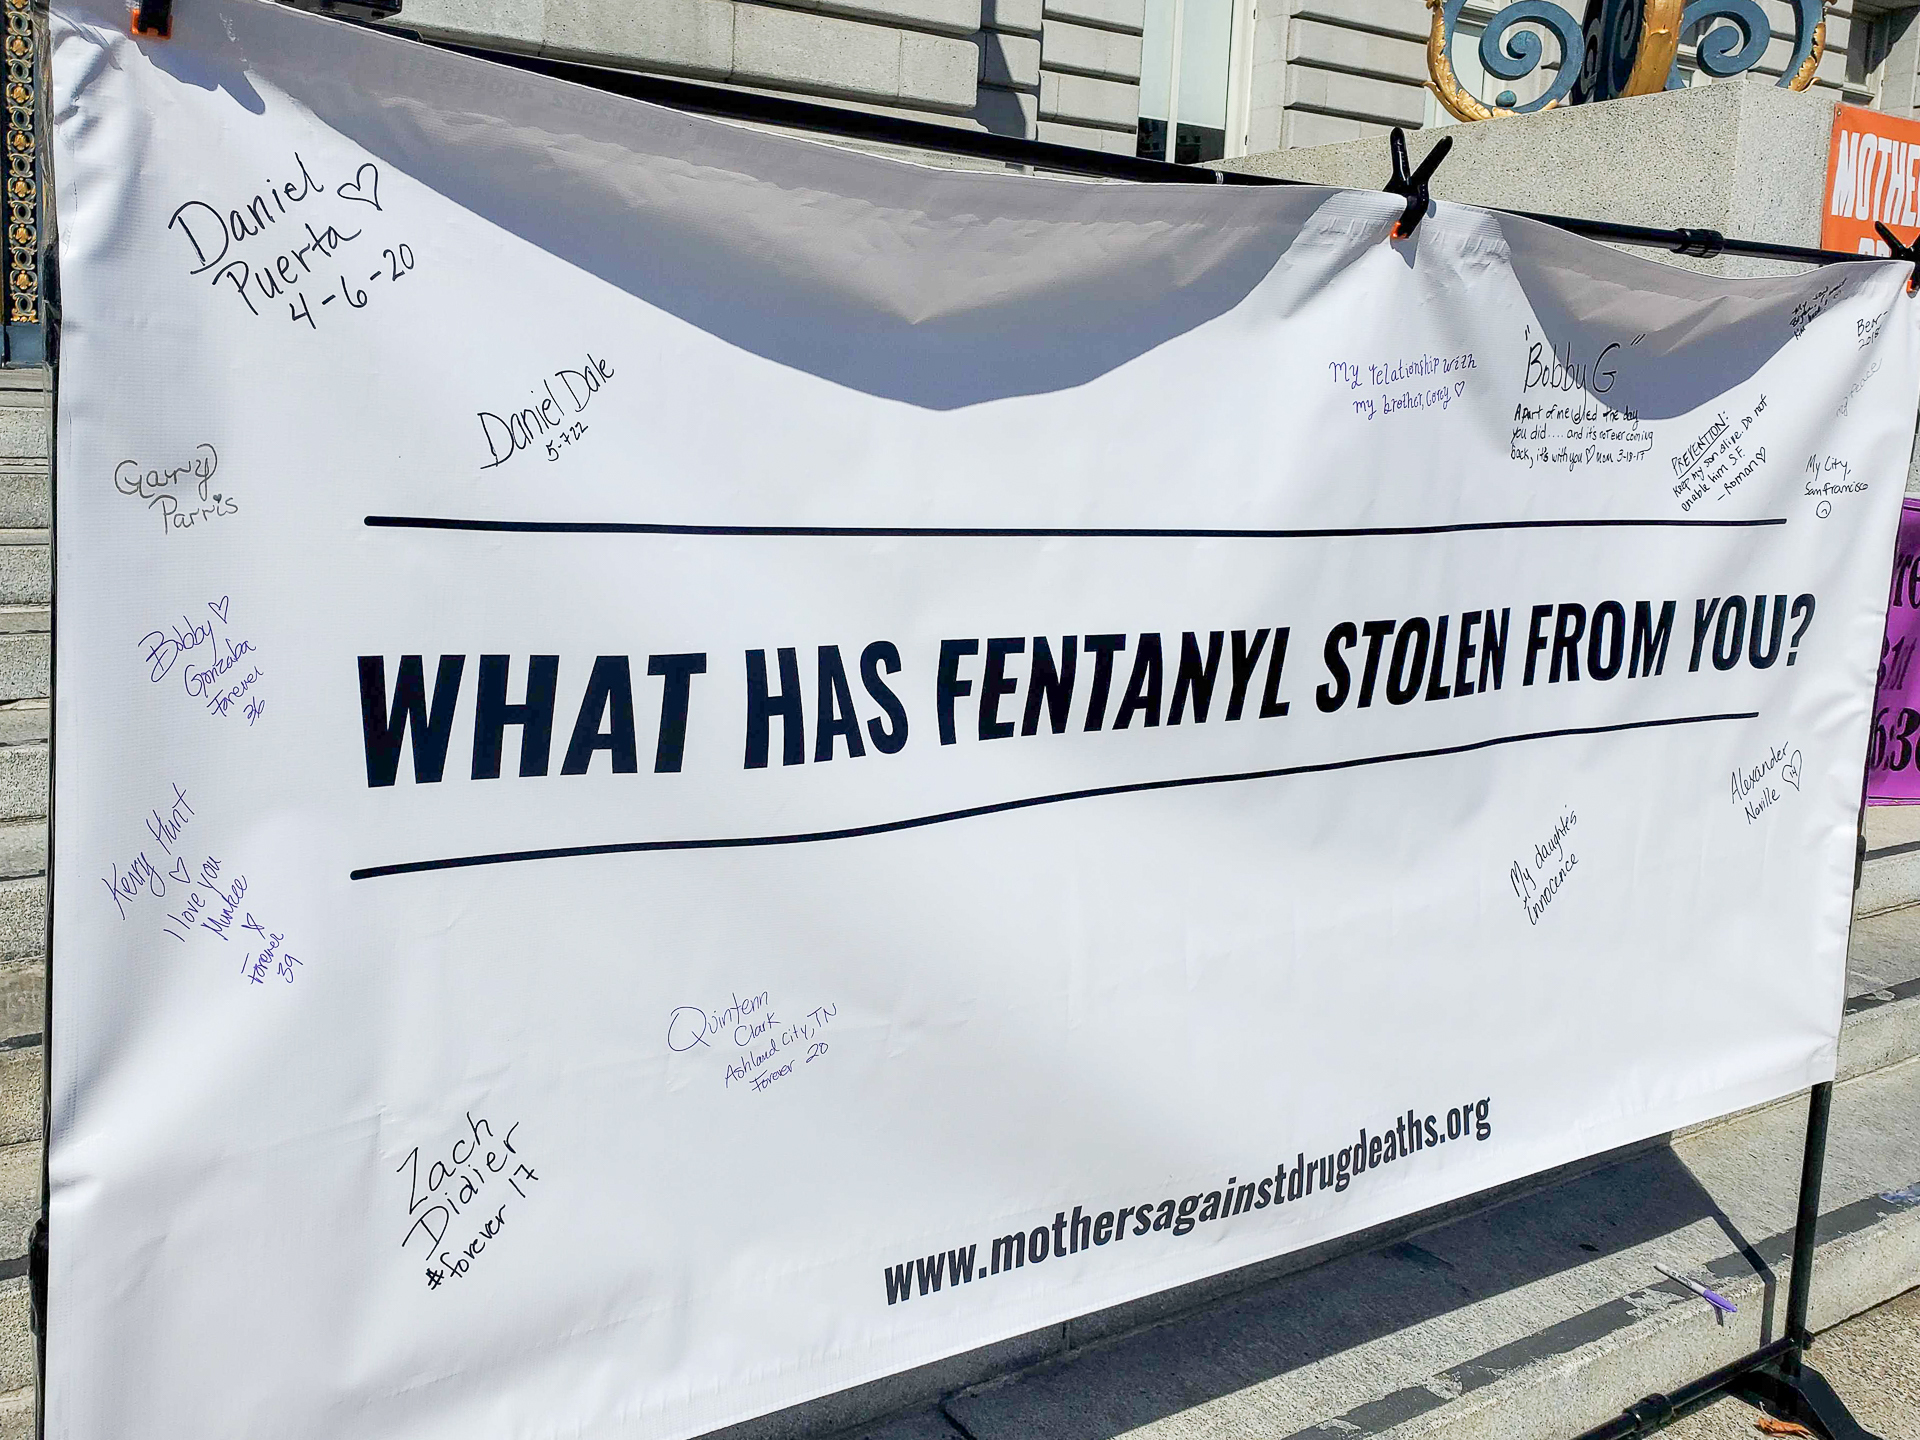 a sign that reads "What has fentanyl stolen from you?"